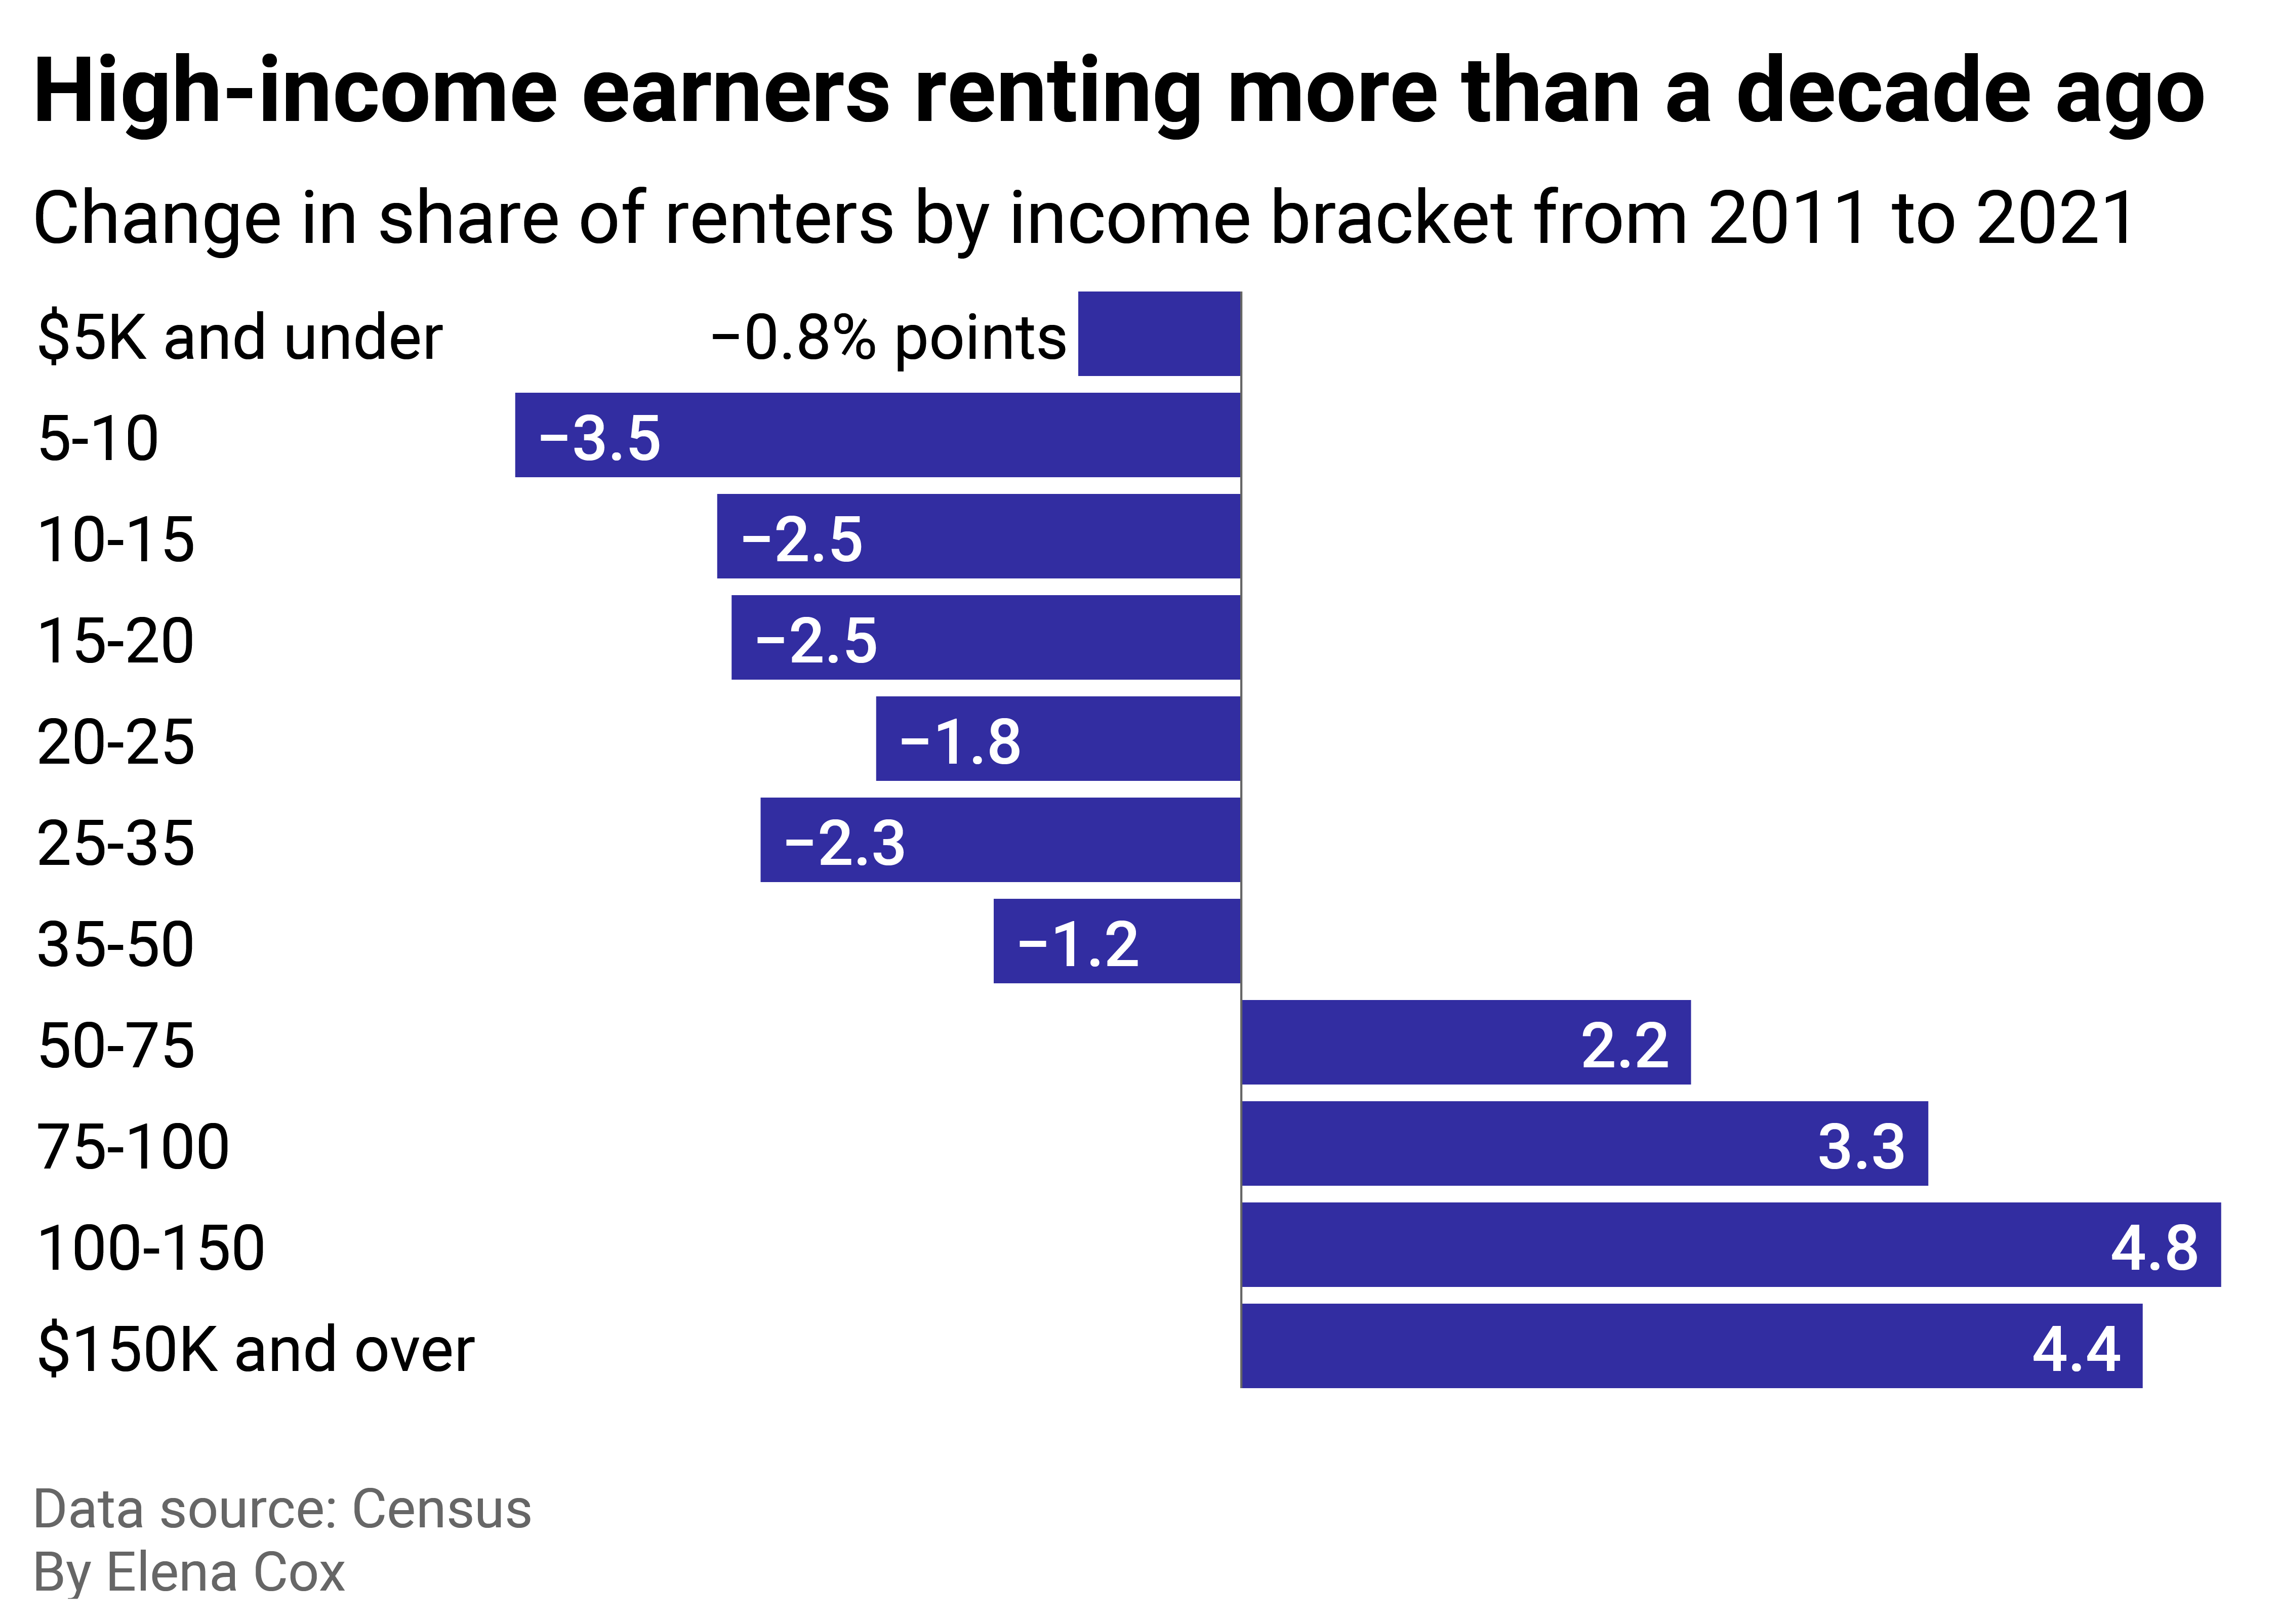 A bar chart showing high-income earners renting more than a decade ago.